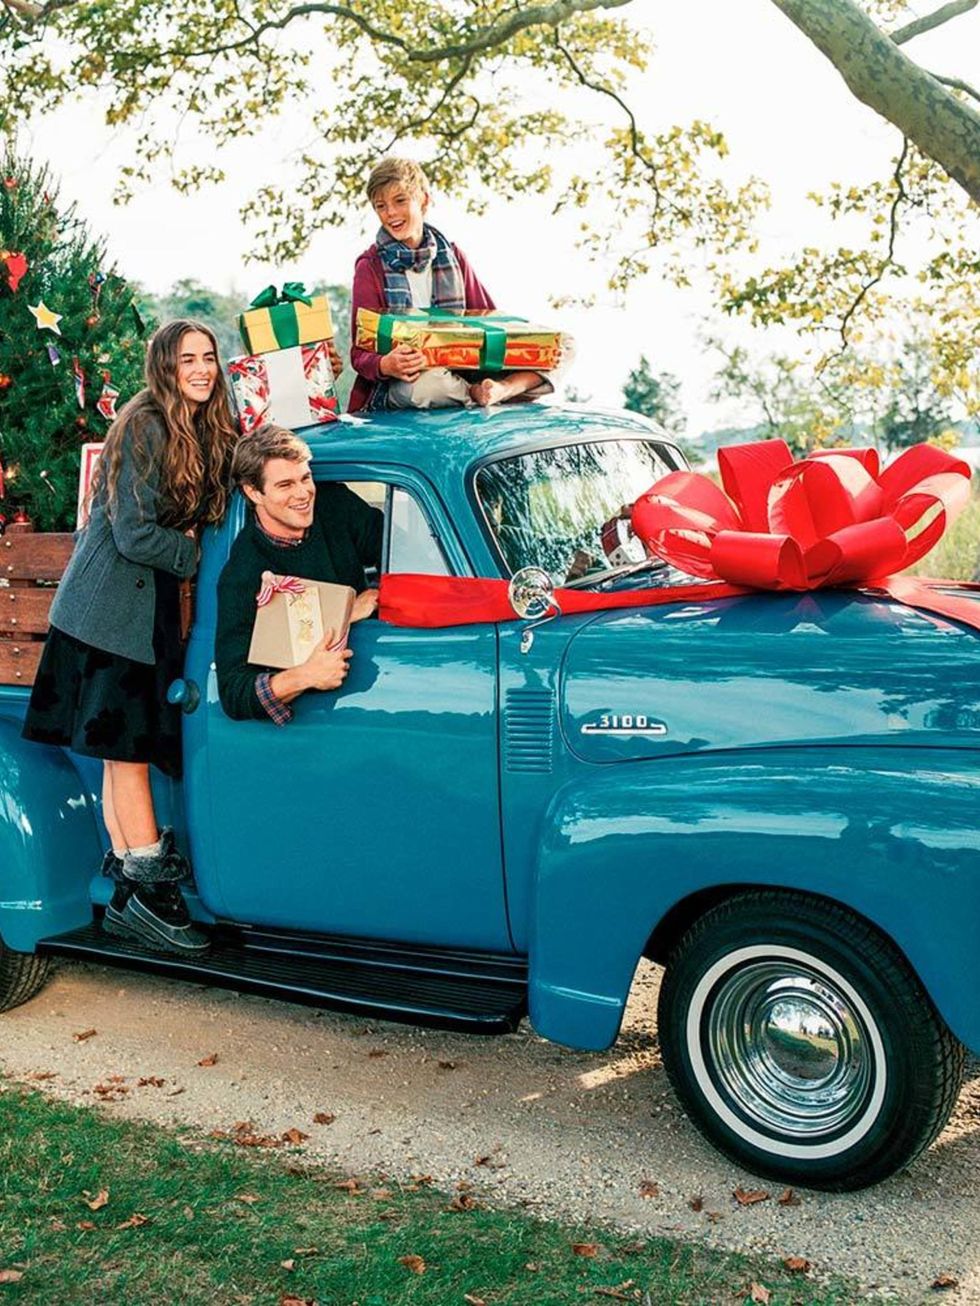 Bruce Weber photographed the Lands' End AW15 holiday campaign